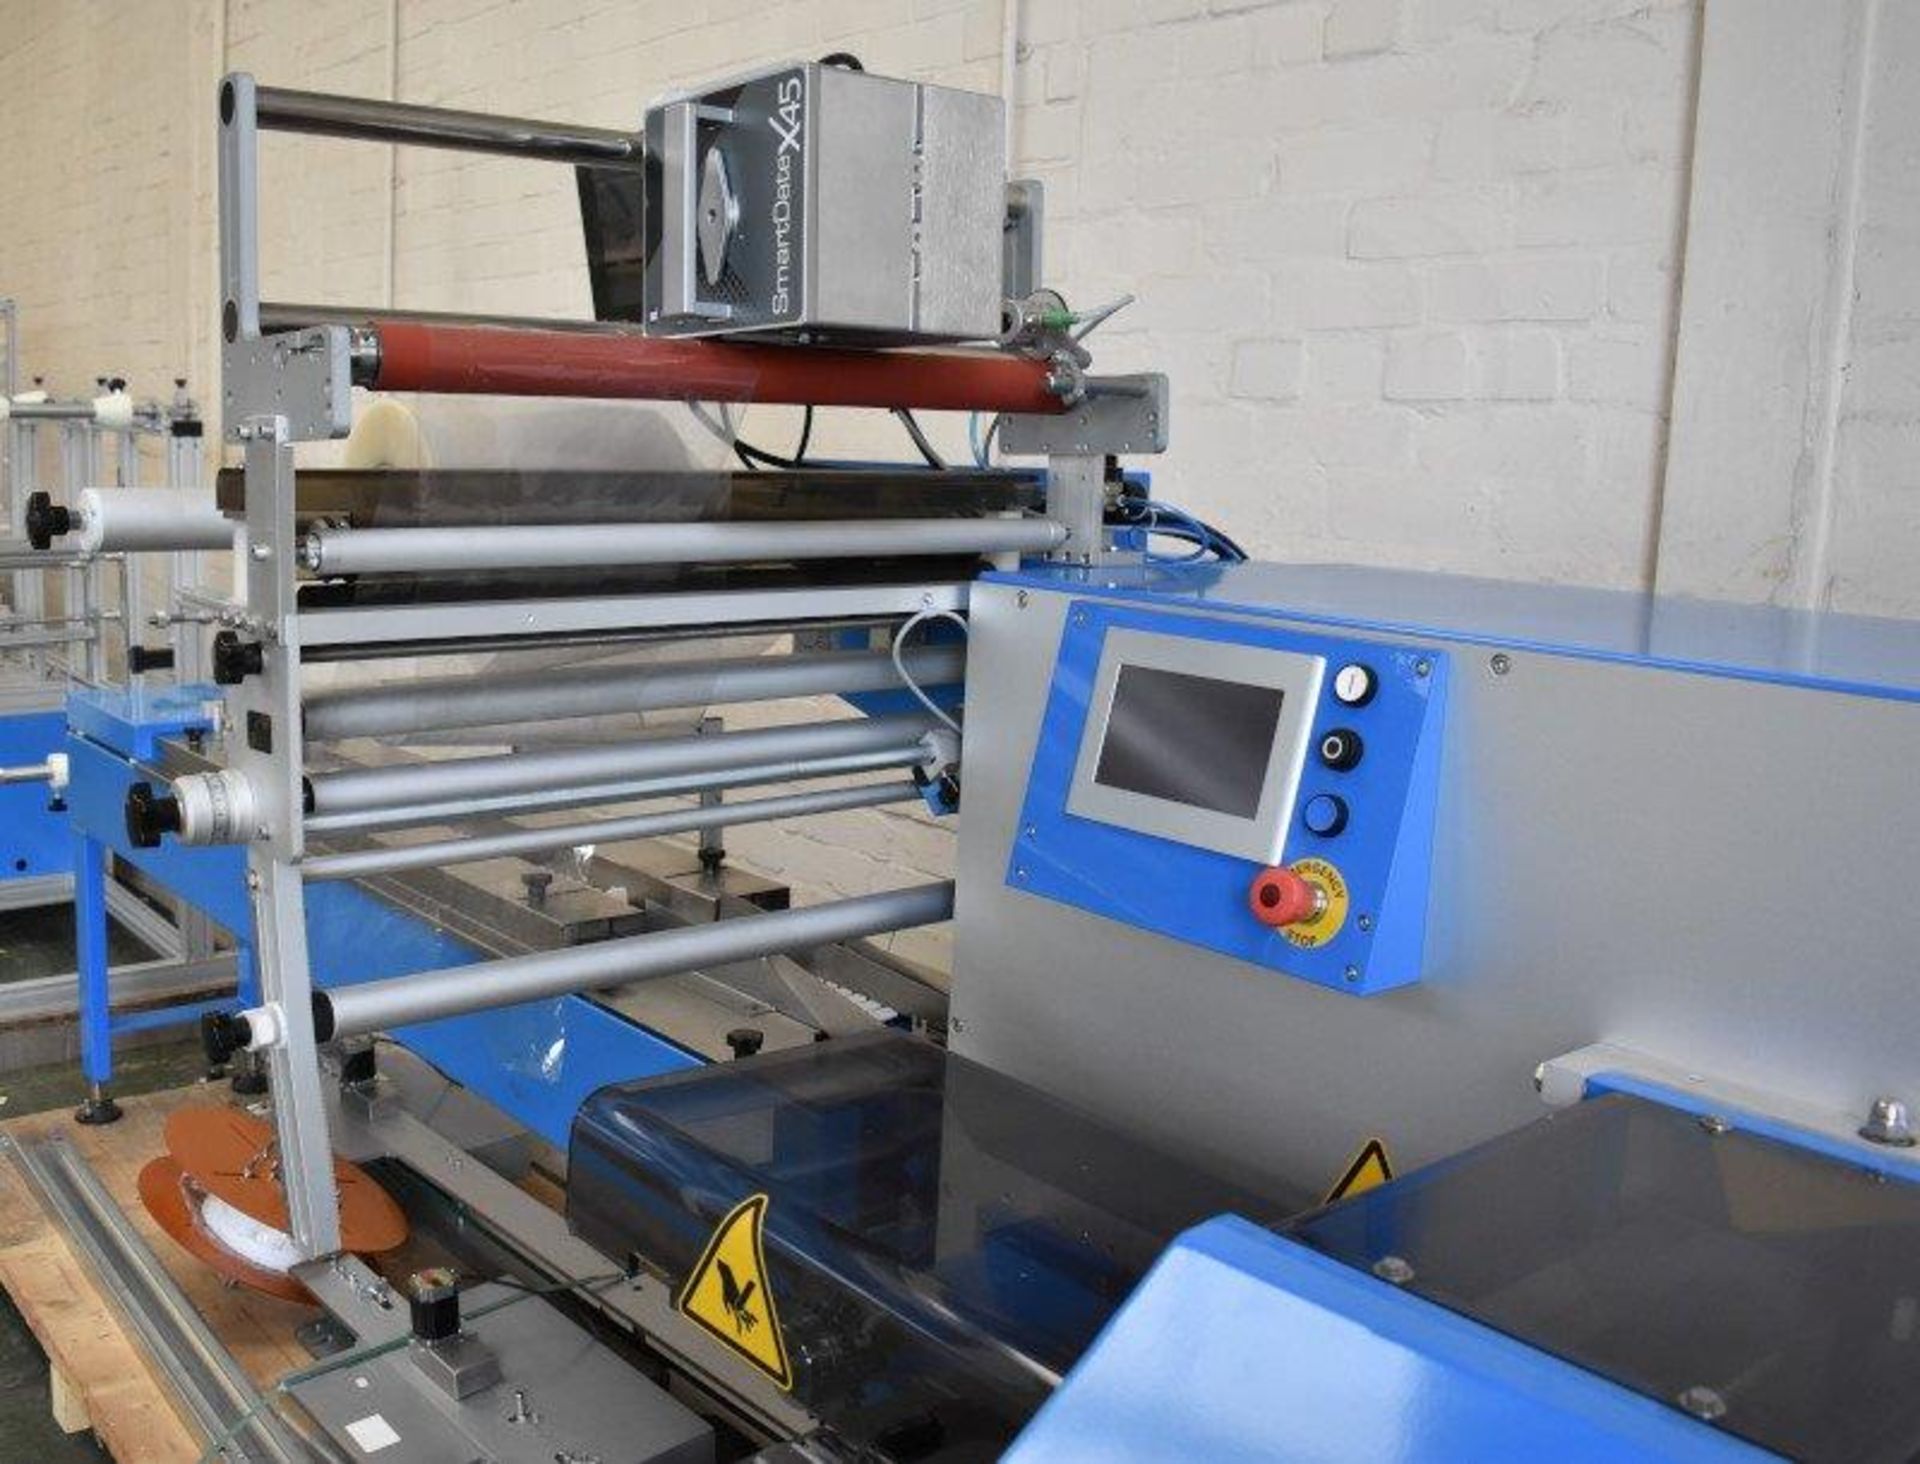 Expert fully automated Mask Making Machine including an Ilapak Smart flow wrapping packaging machine - Image 25 of 28